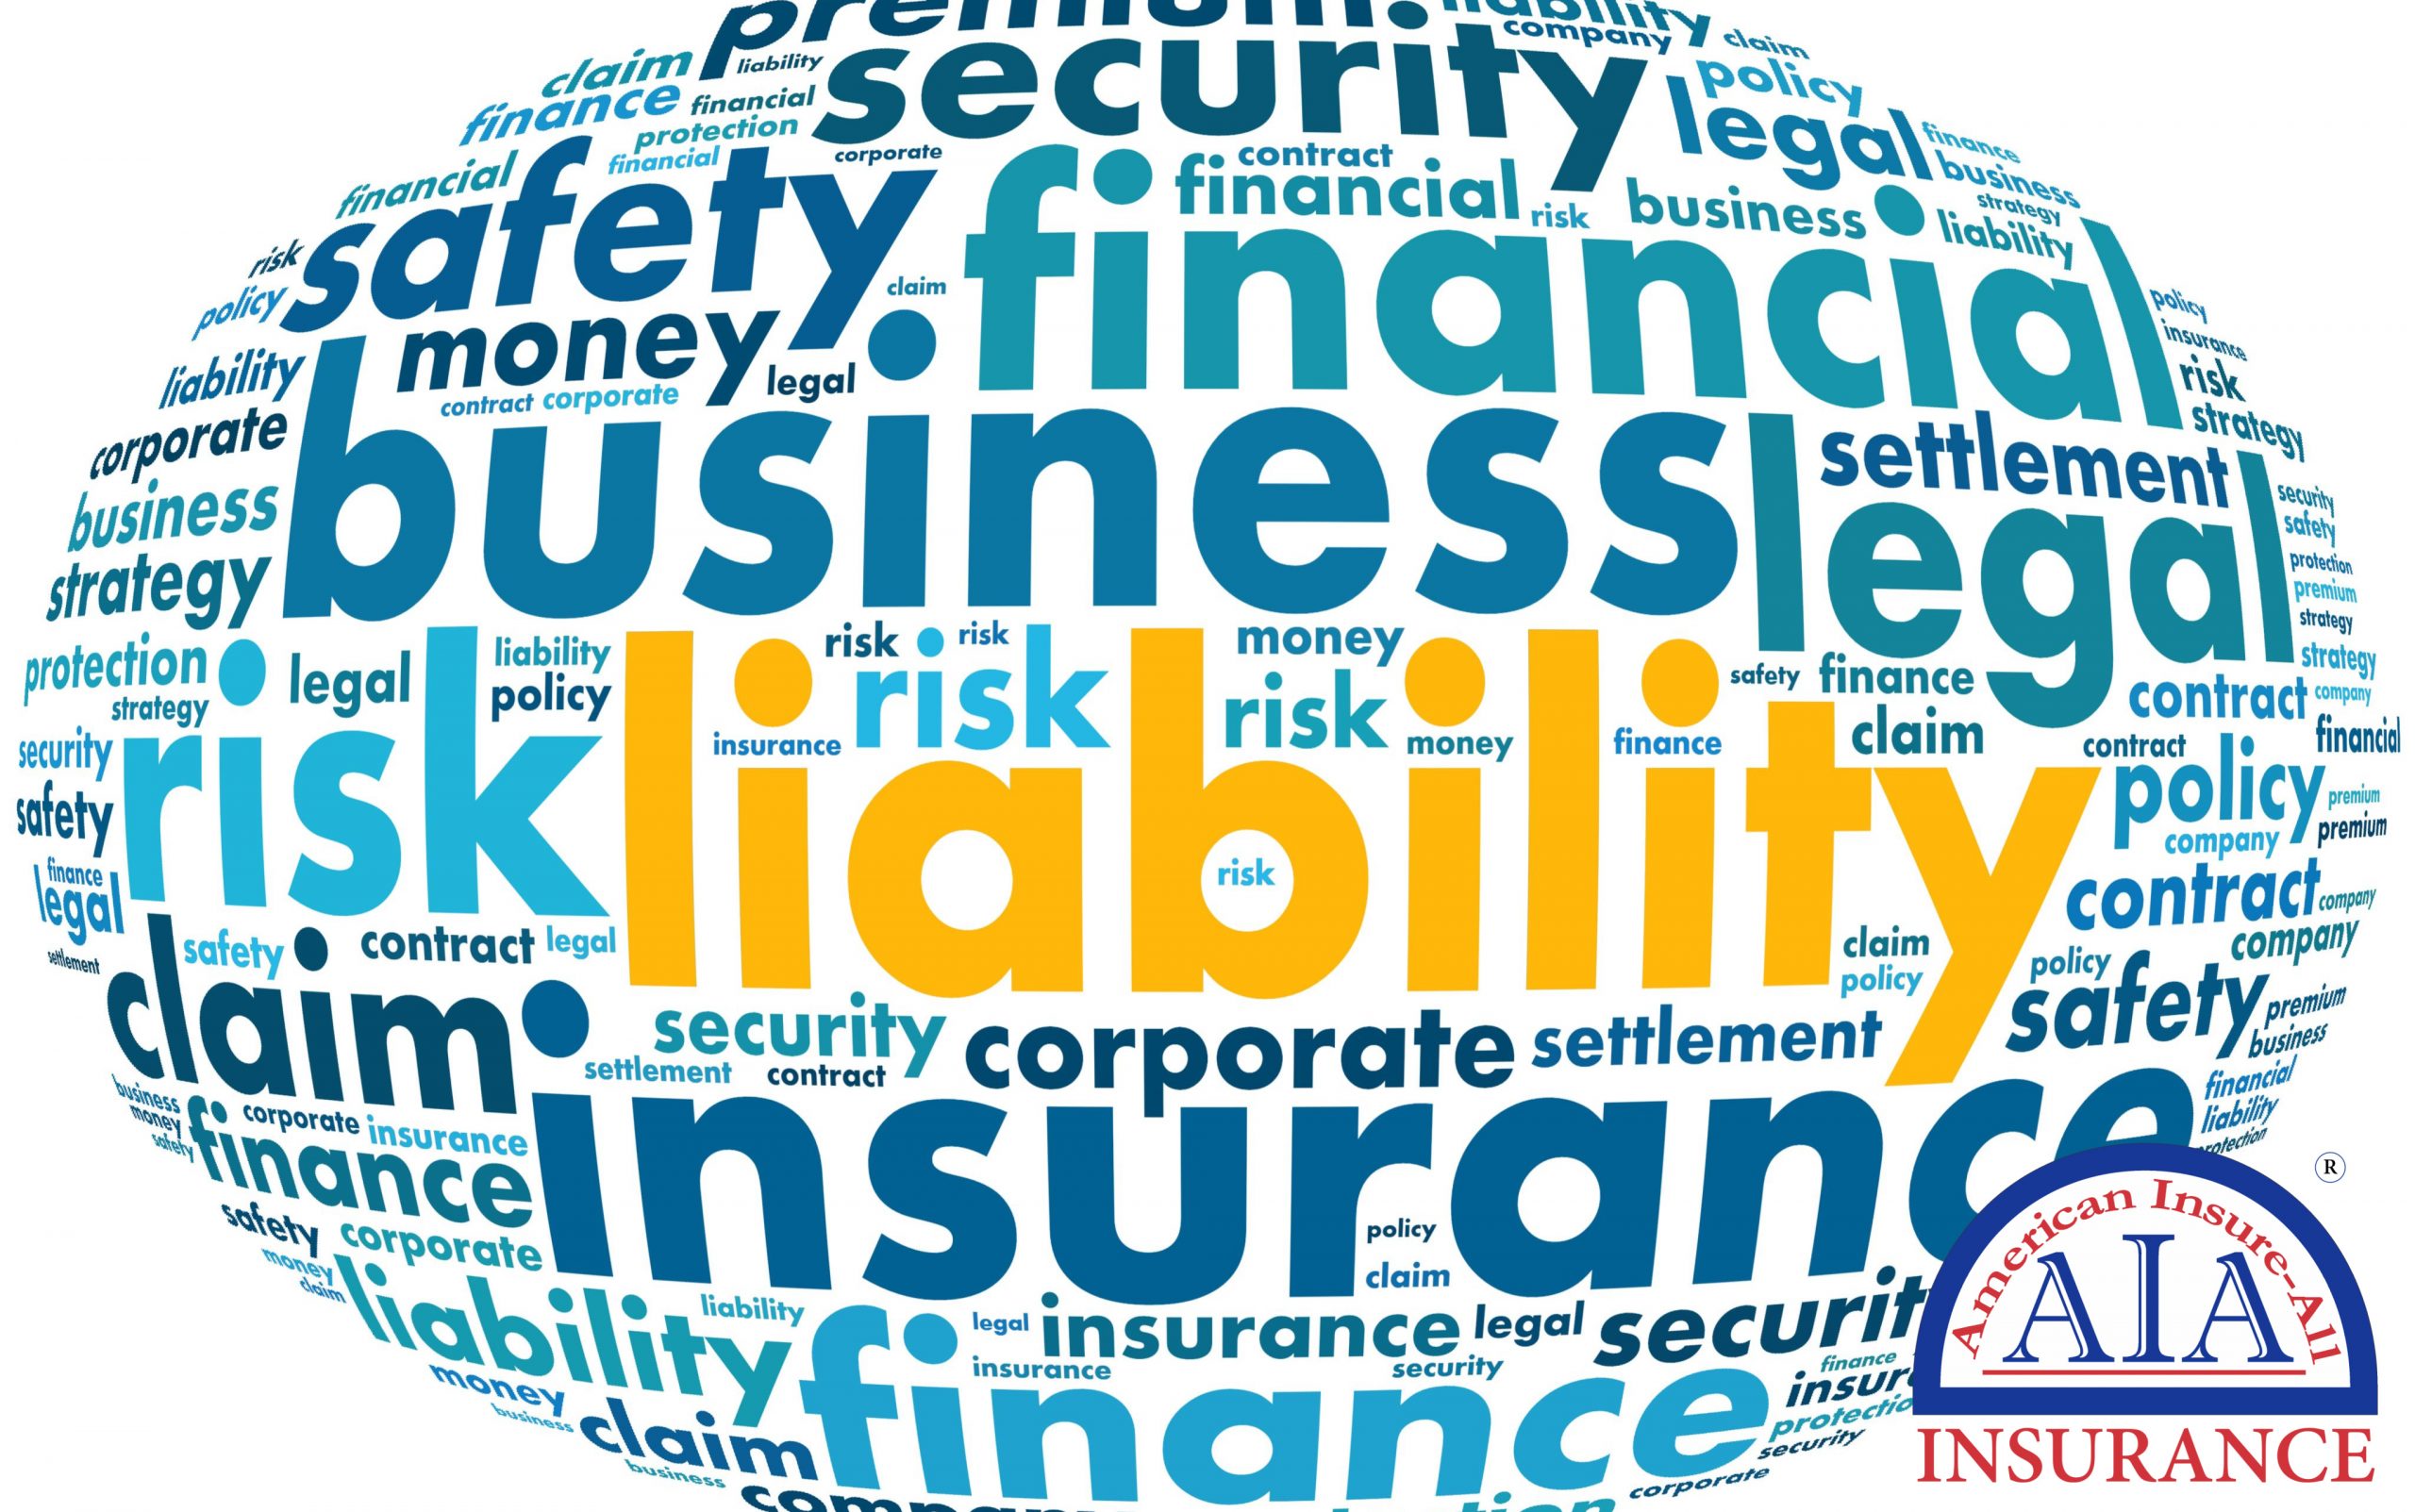 What is the Foundation of What Liability Insurance Will Cover for Business Owners?